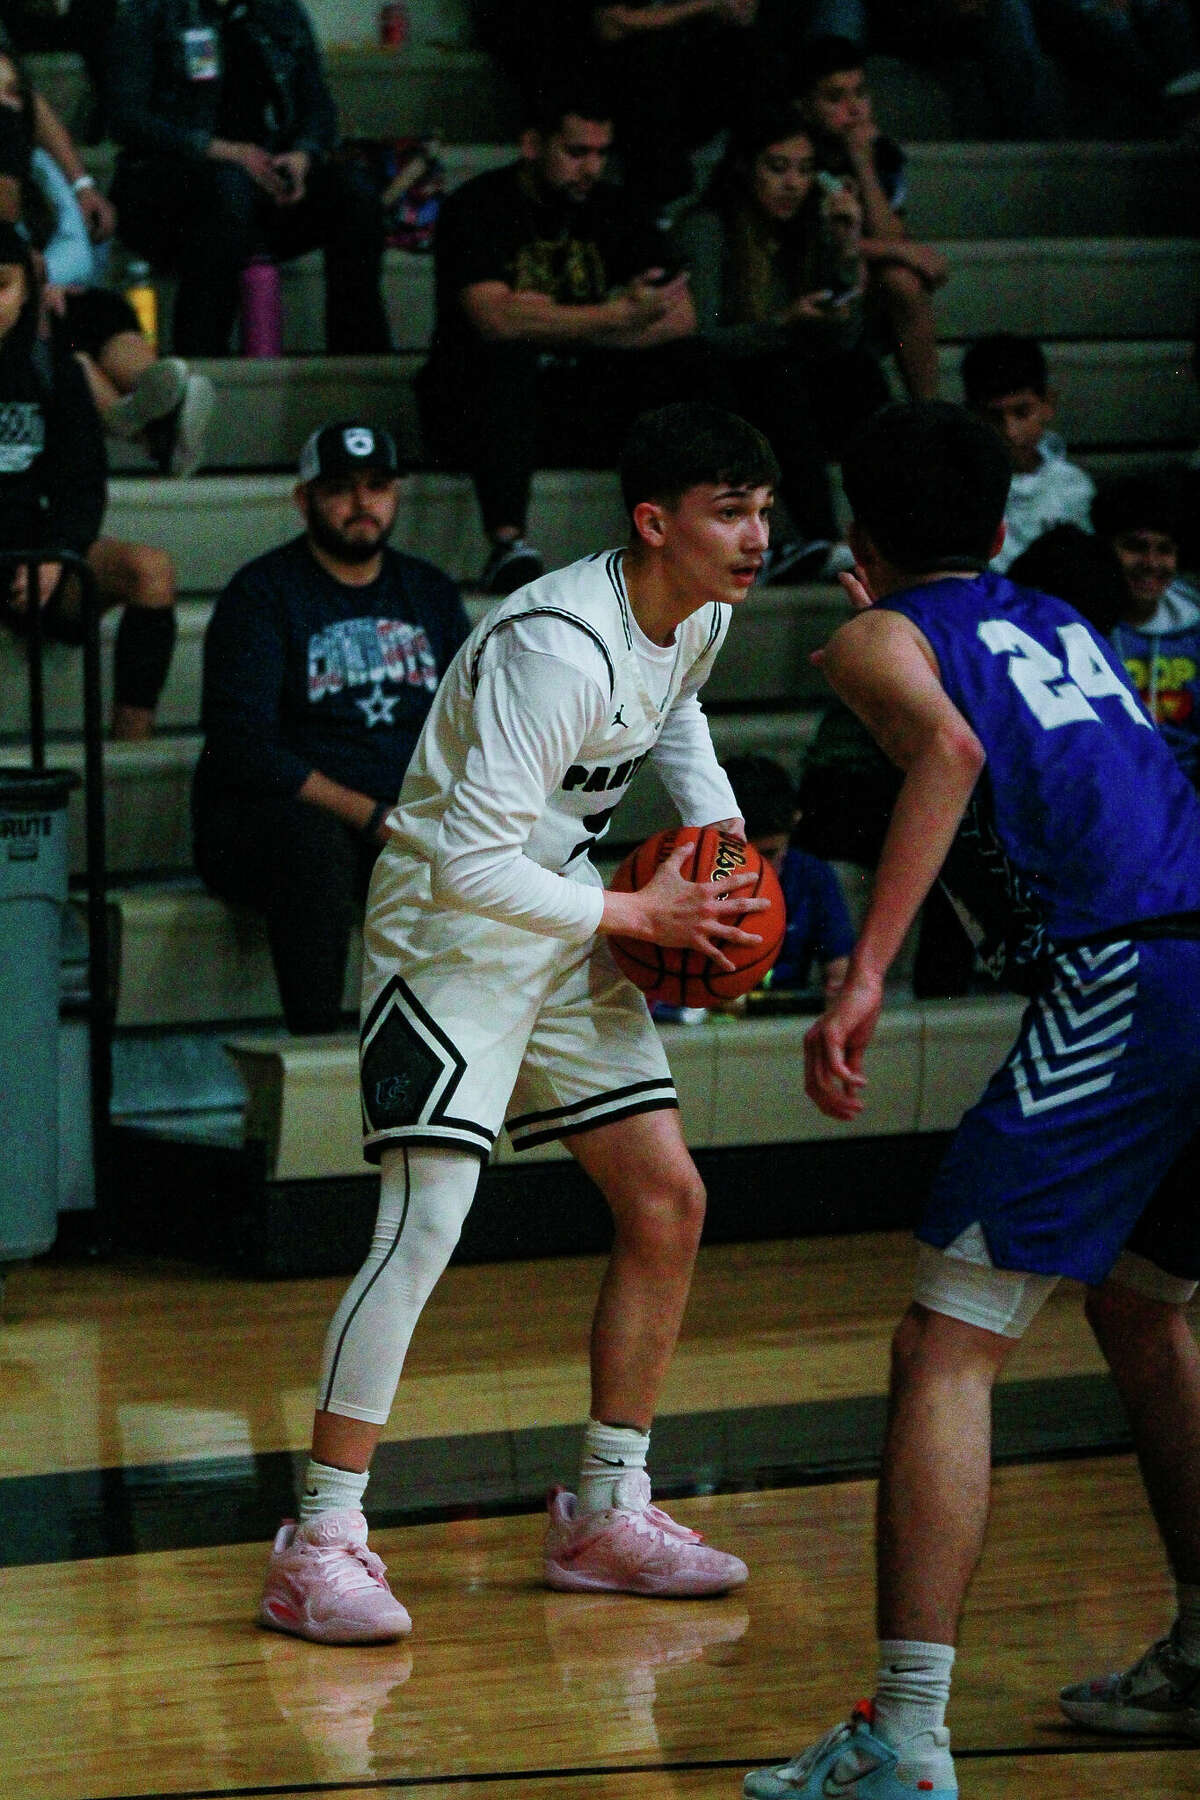 Joey Tello scored 21 points in United South's win over Somerset on Thursday.